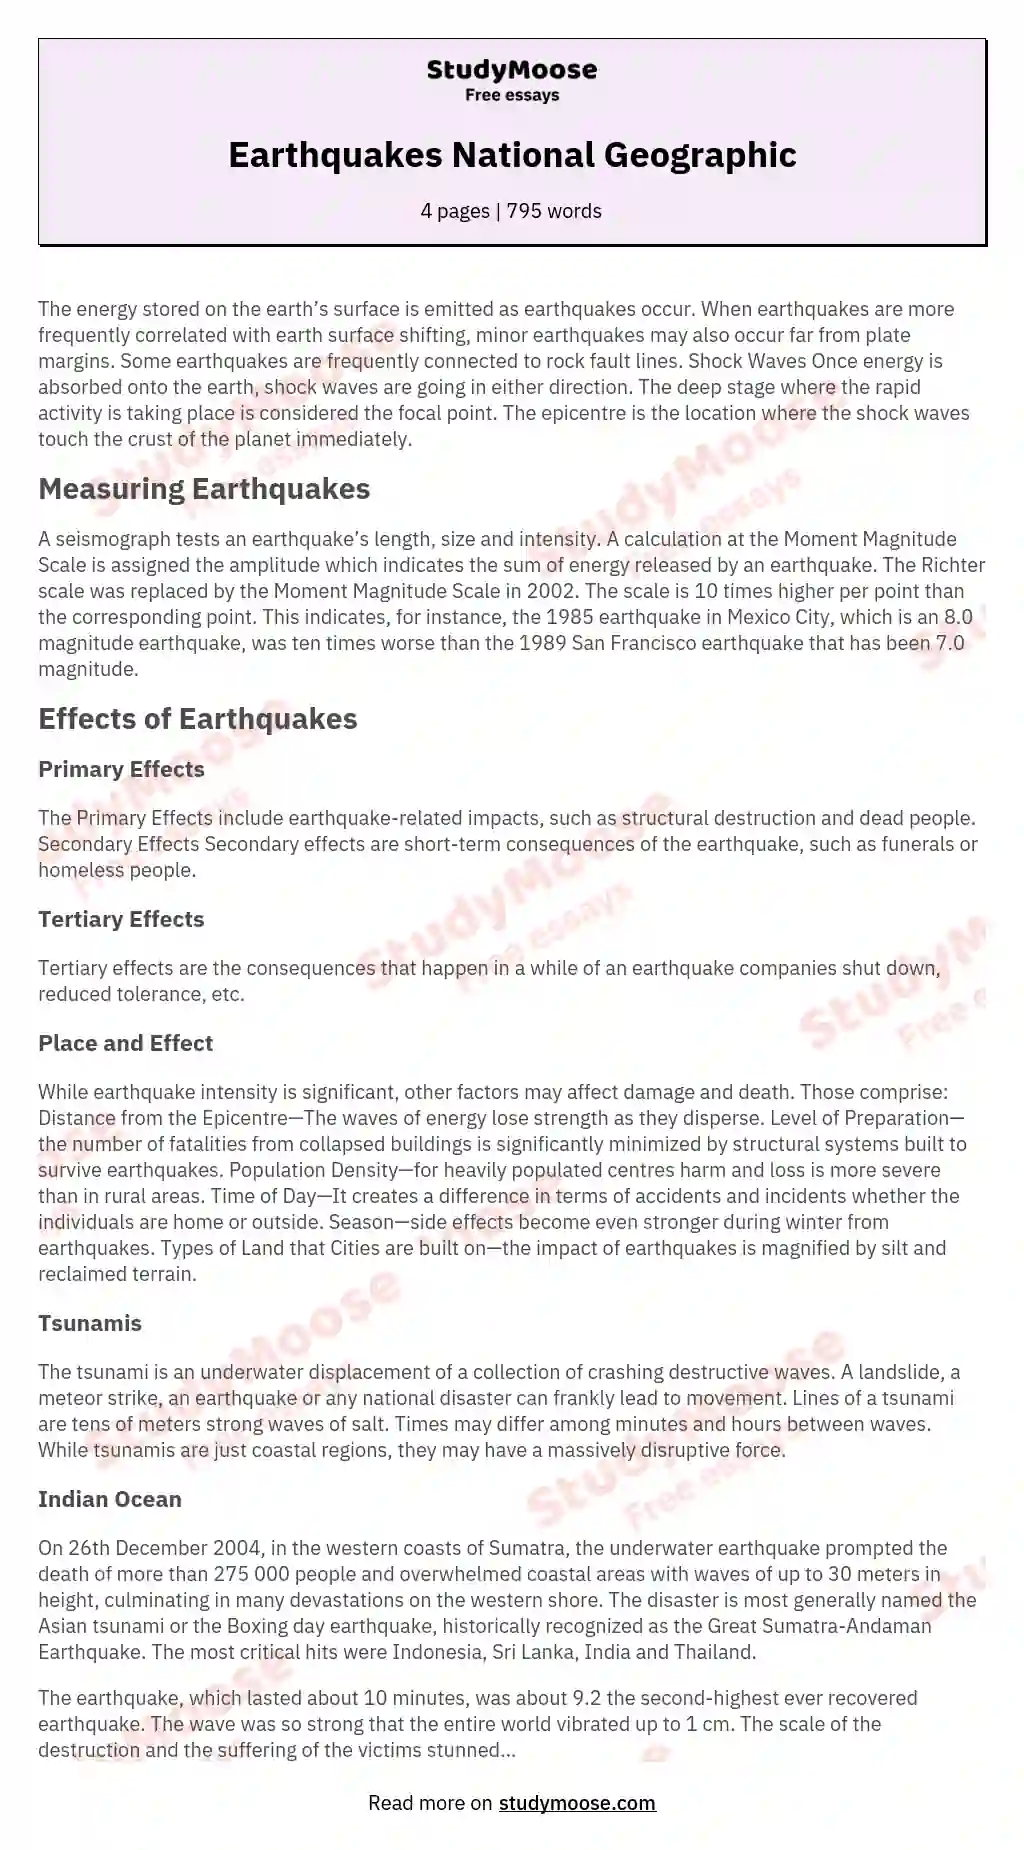 Earthquakes National Geographic essay